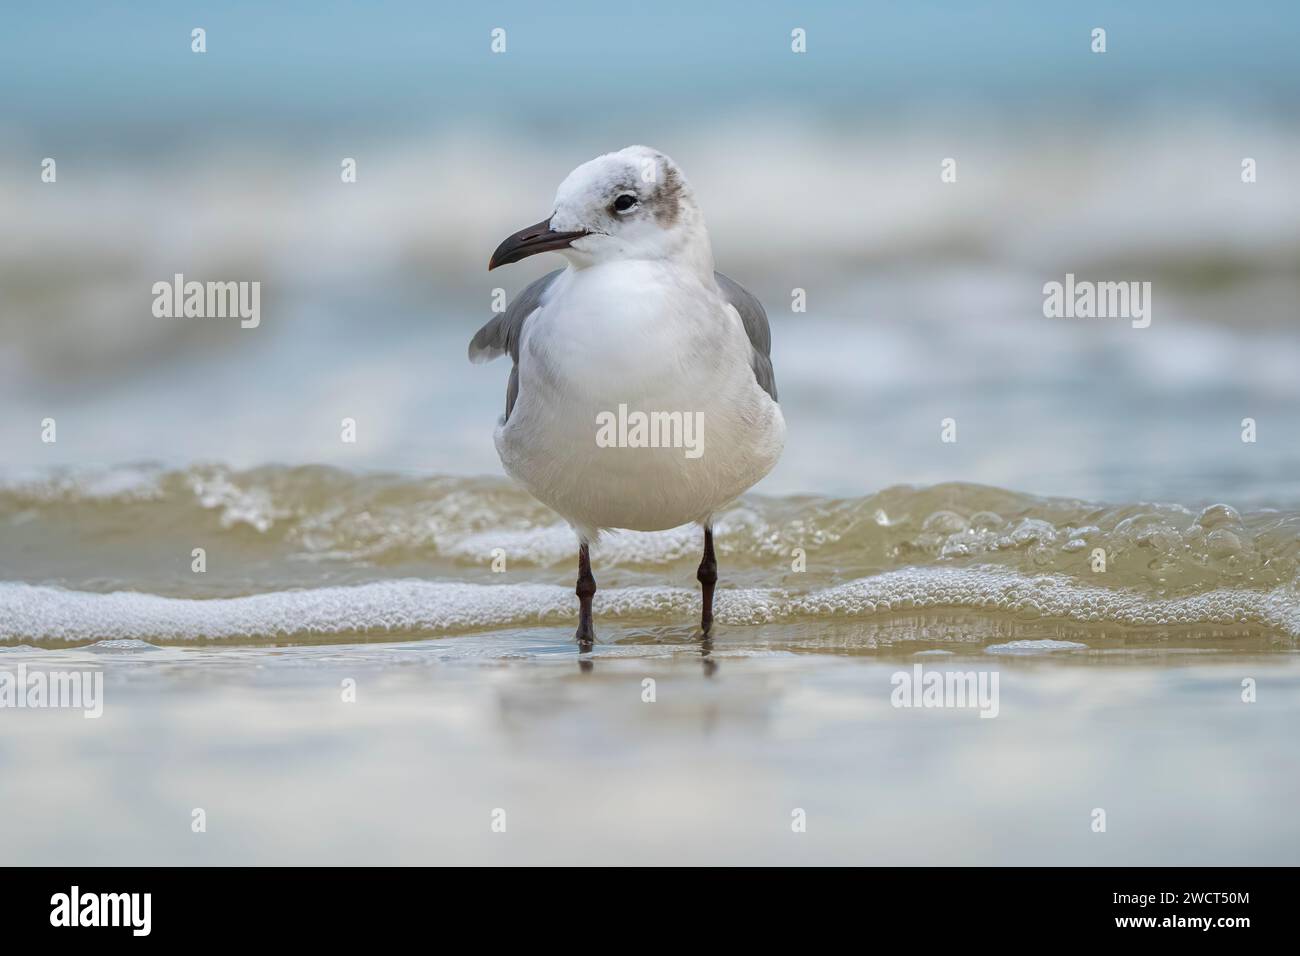 A solitary seagull gracefully stands in the calm, shallow waters of a pristine beach. Stock Photo